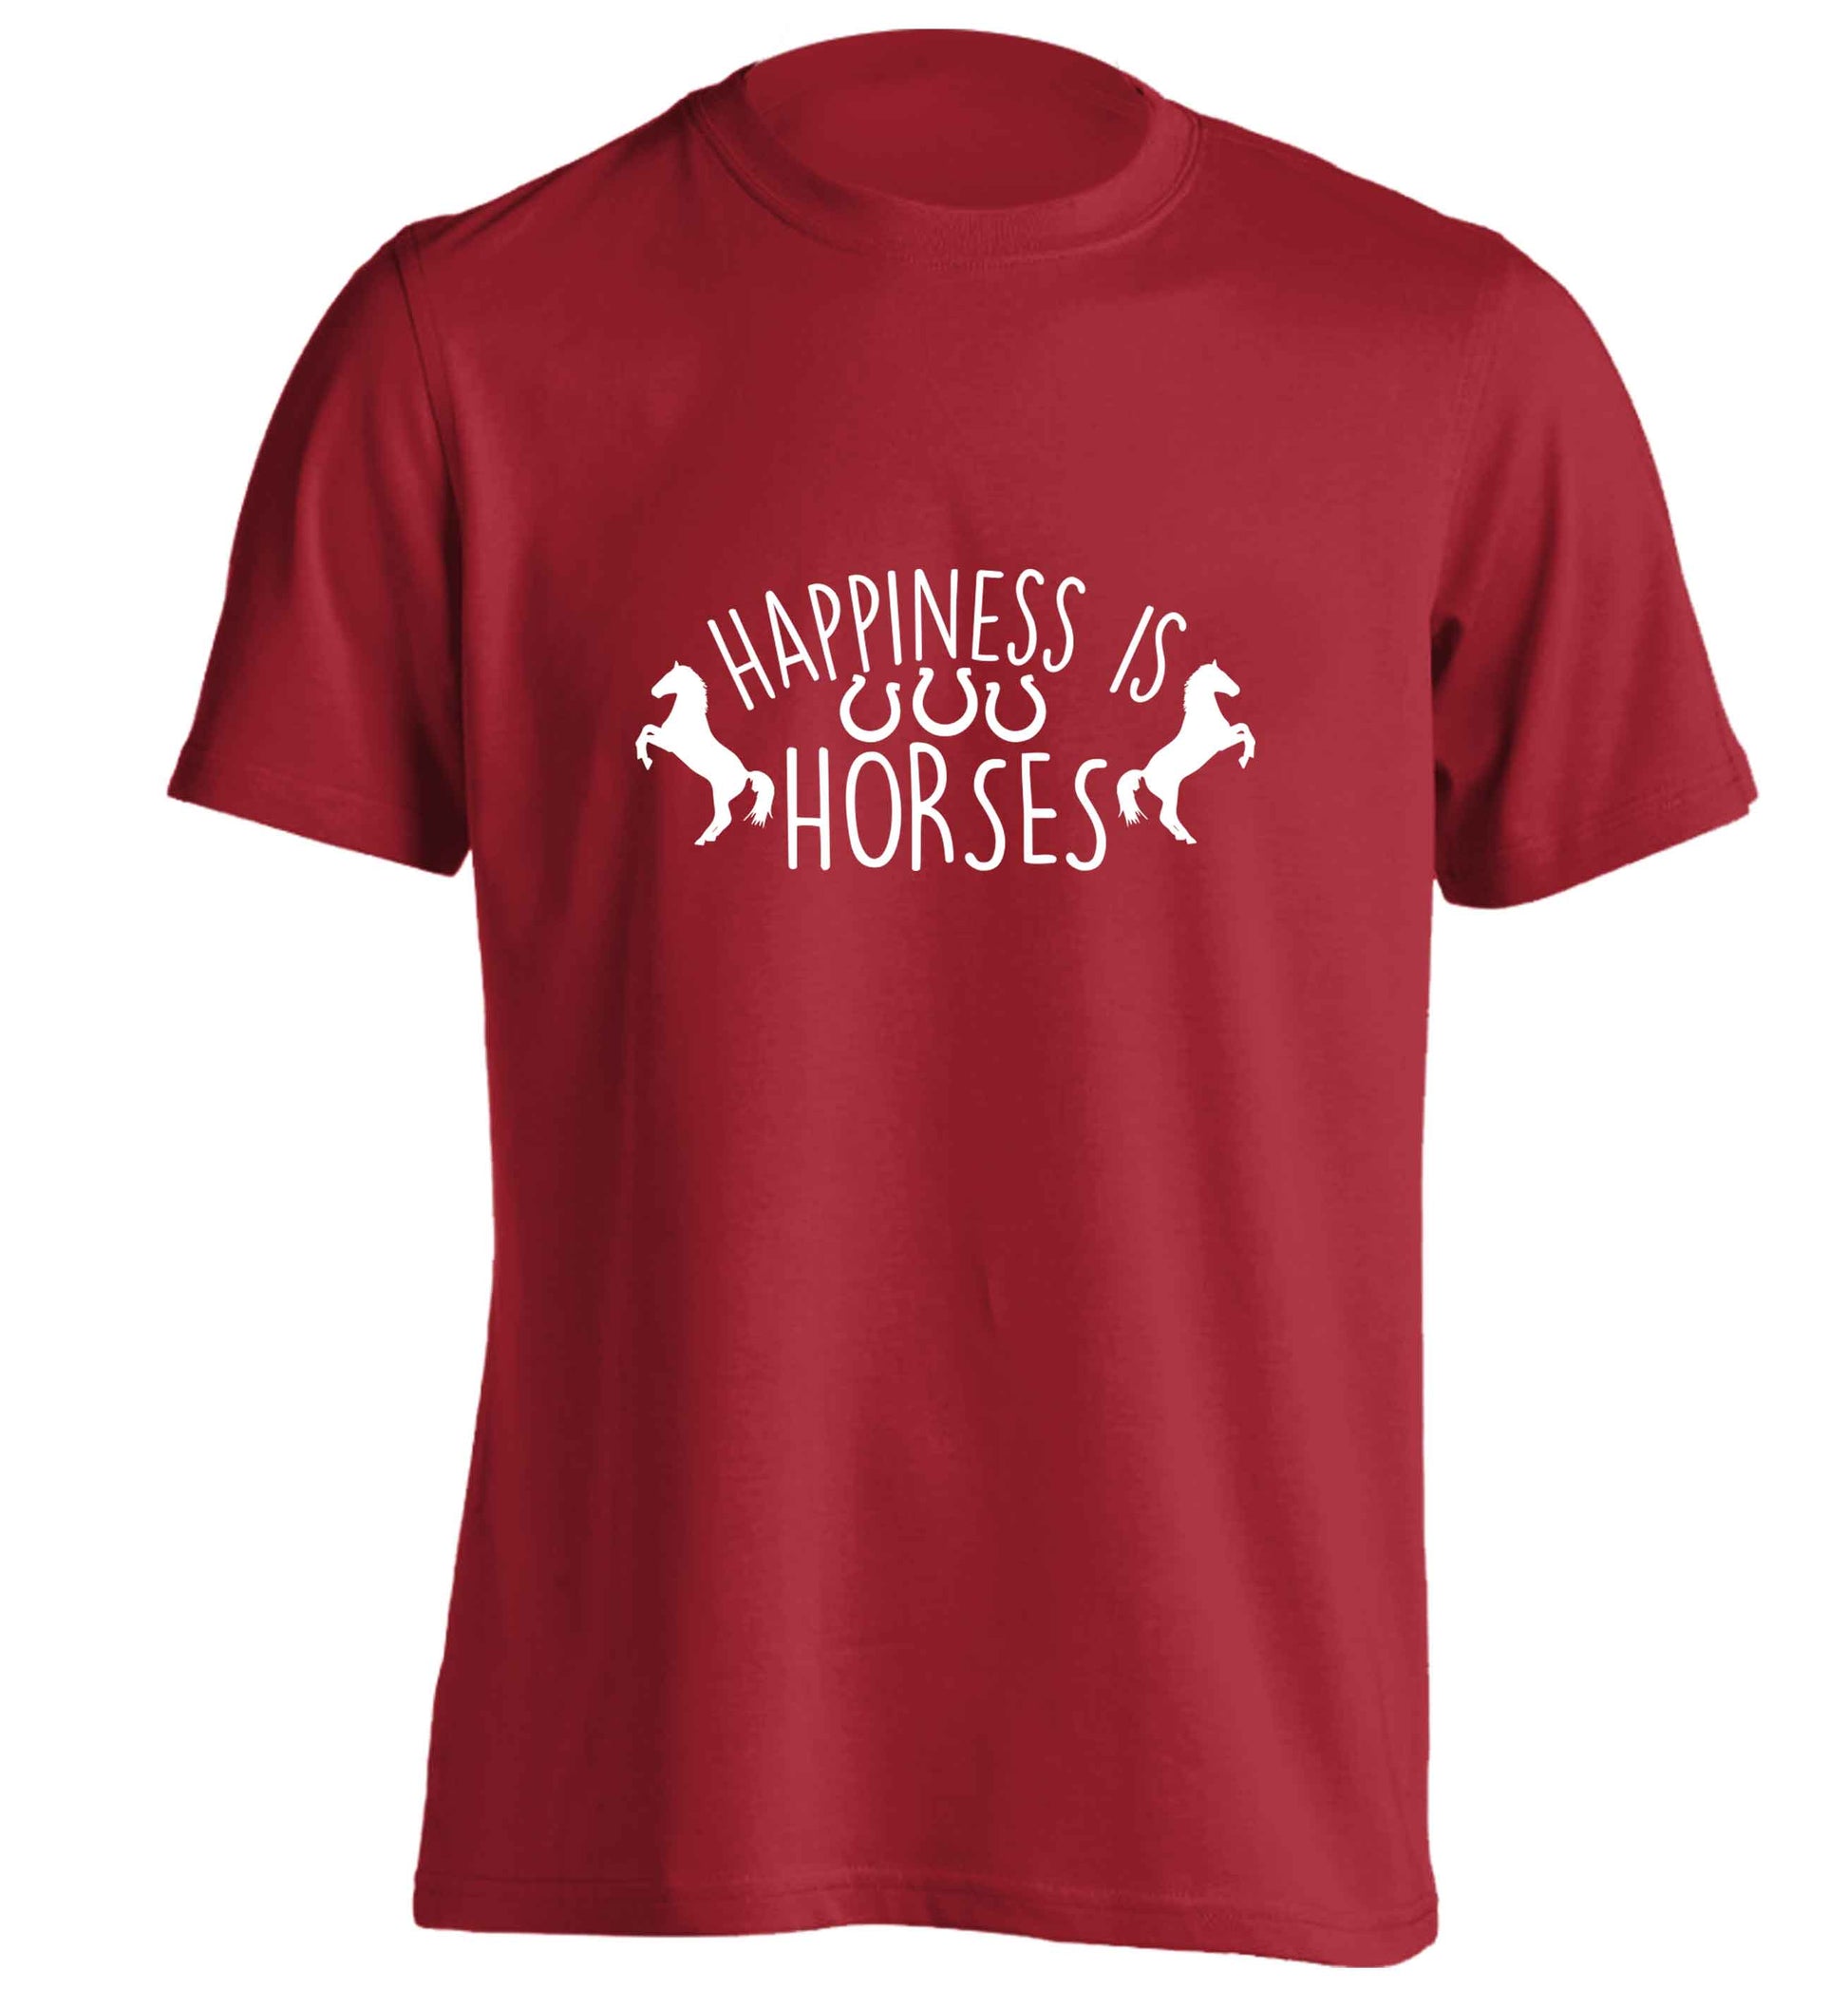 Happiness is horses adults unisex red Tshirt 2XL